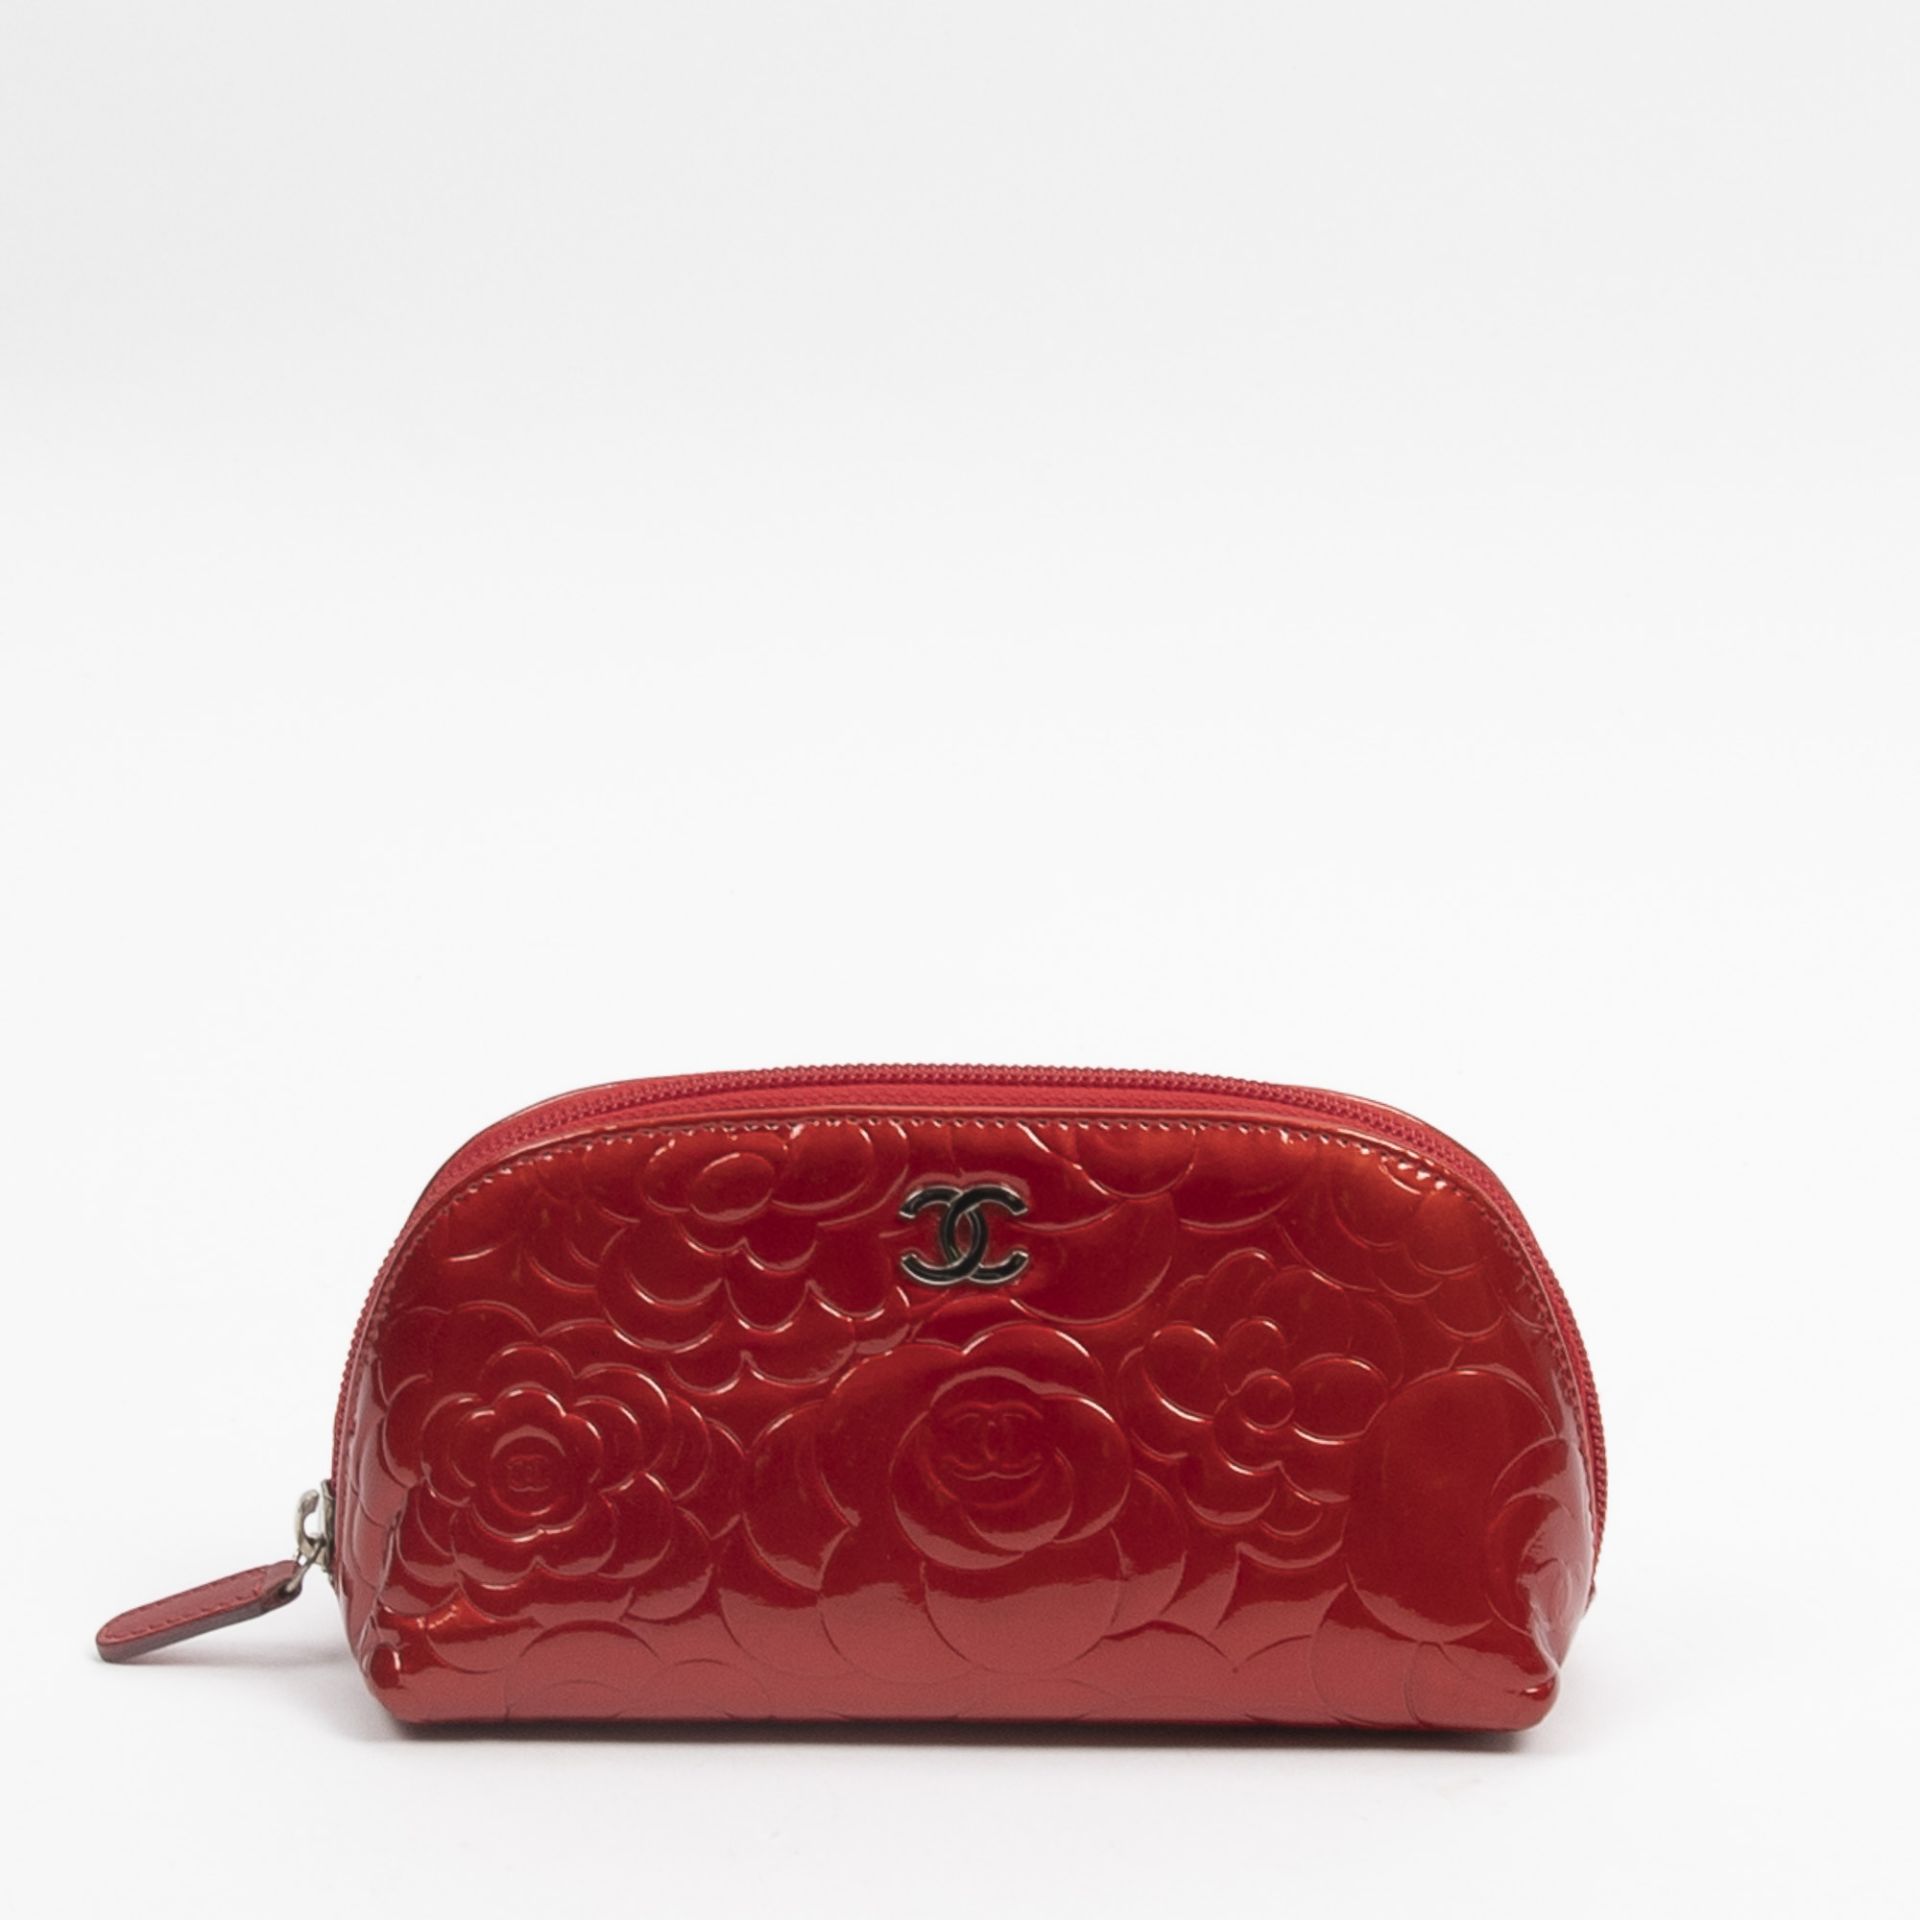 RRP £600 Chanel Camellia Cosmetic Pouch In Red Grade A AAR8520 (Bags Are Not On Site, Please Email